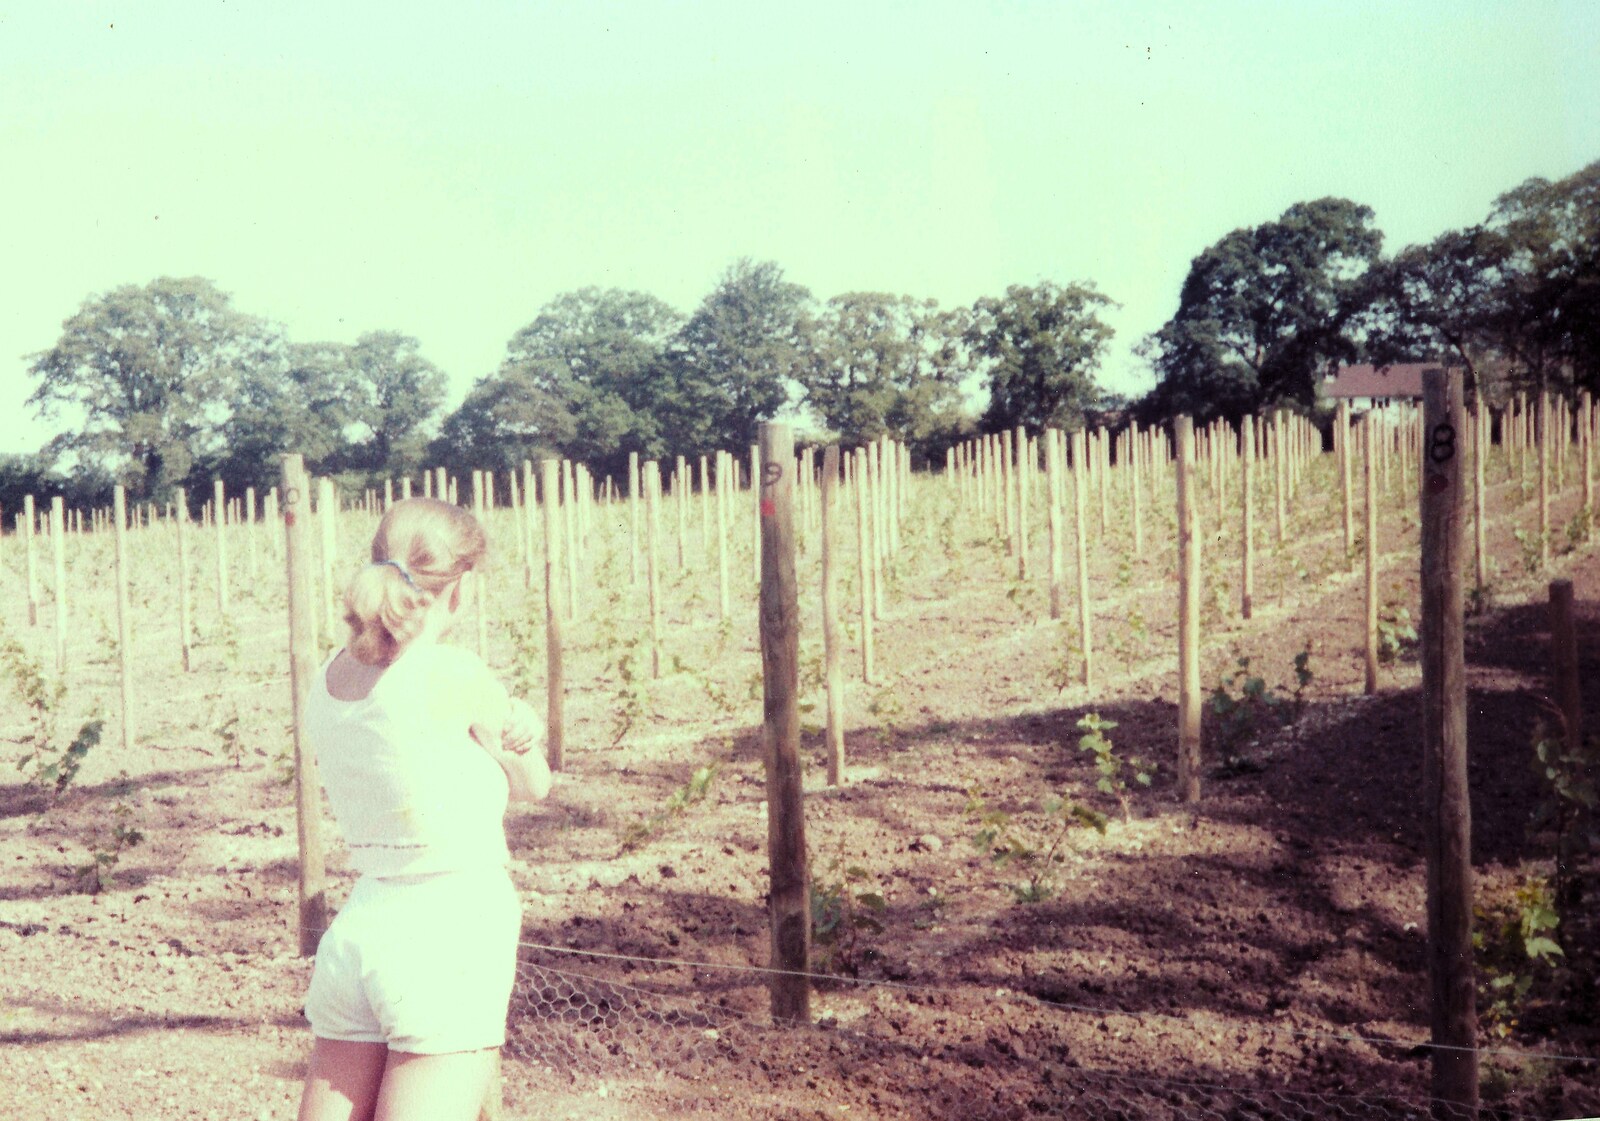 The vineyard is complete from Constructing a Vineyard, Harrow Road, Bransgore, Dorset - 1st September 1981